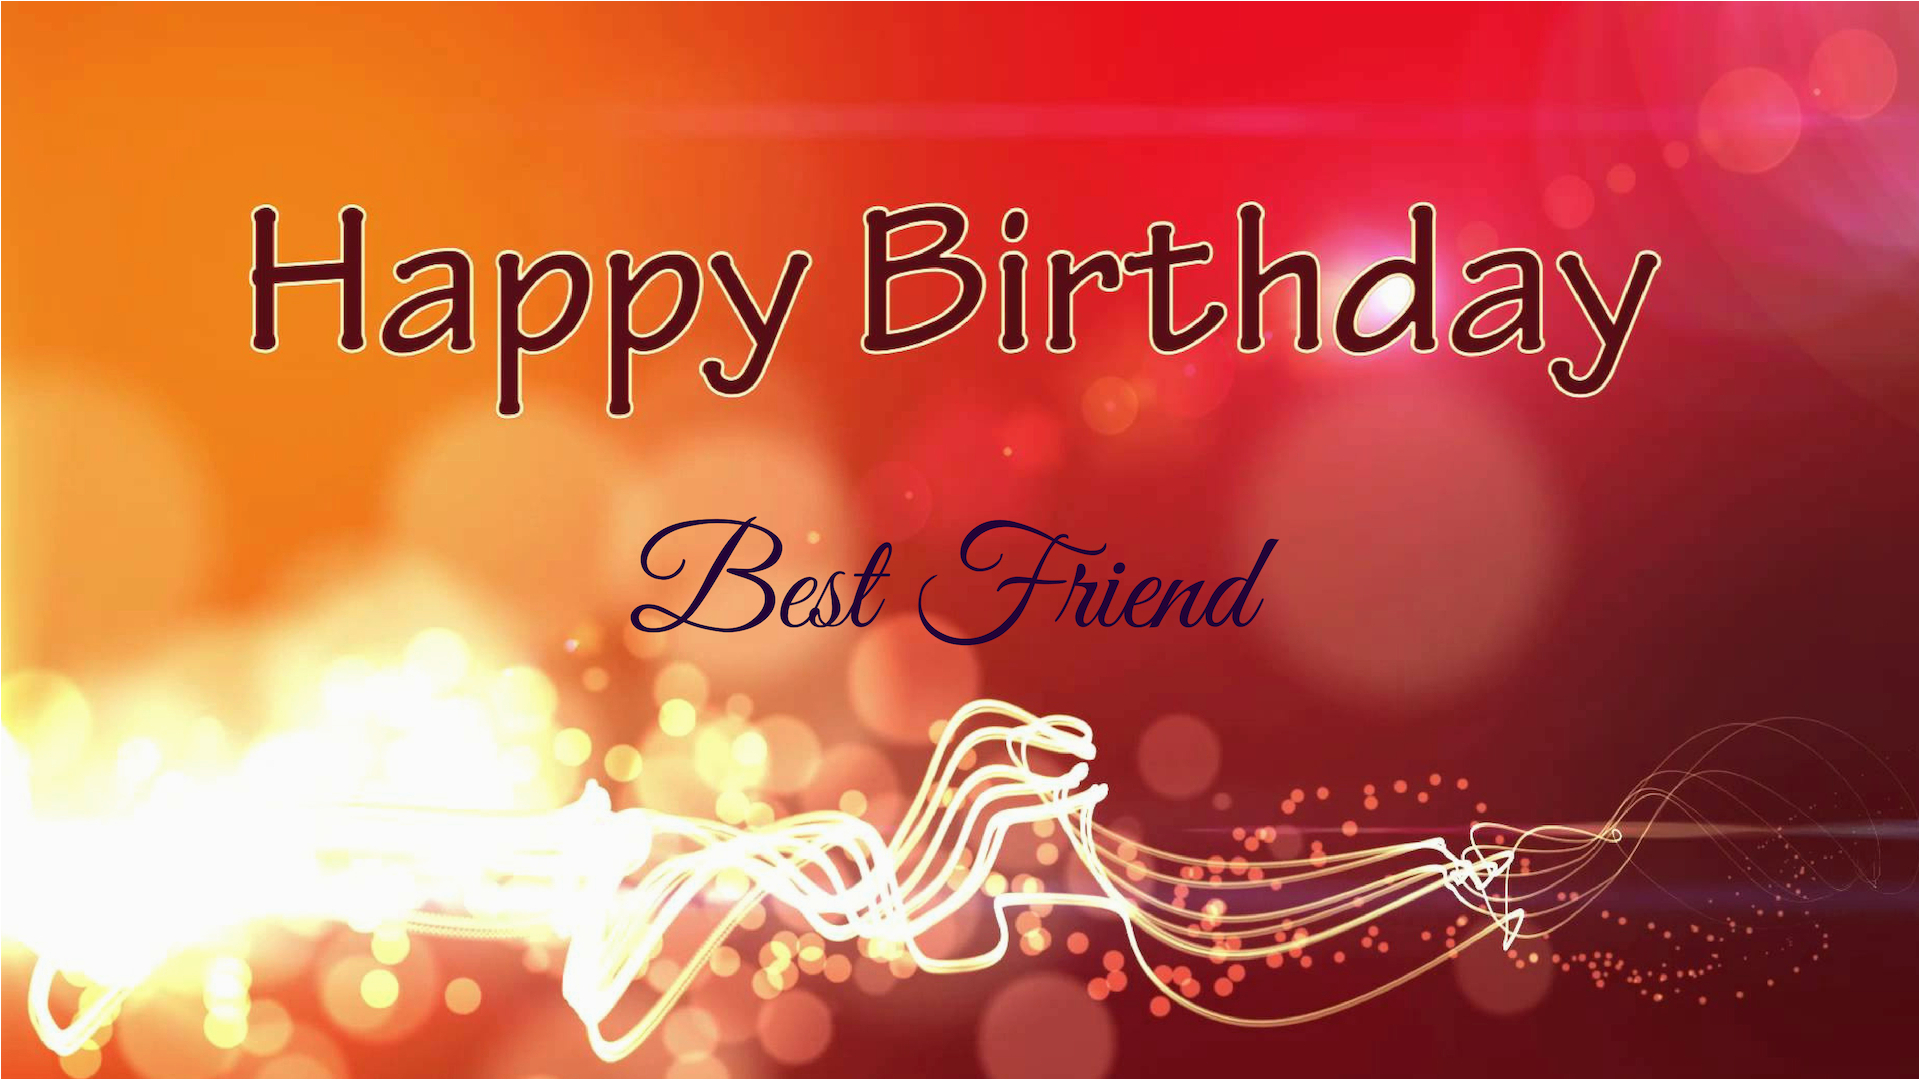 Happy Birthday Pics With Quotes Hd Happy Birthday Friend - New Happy Birthday Background Hd , HD Wallpaper & Backgrounds